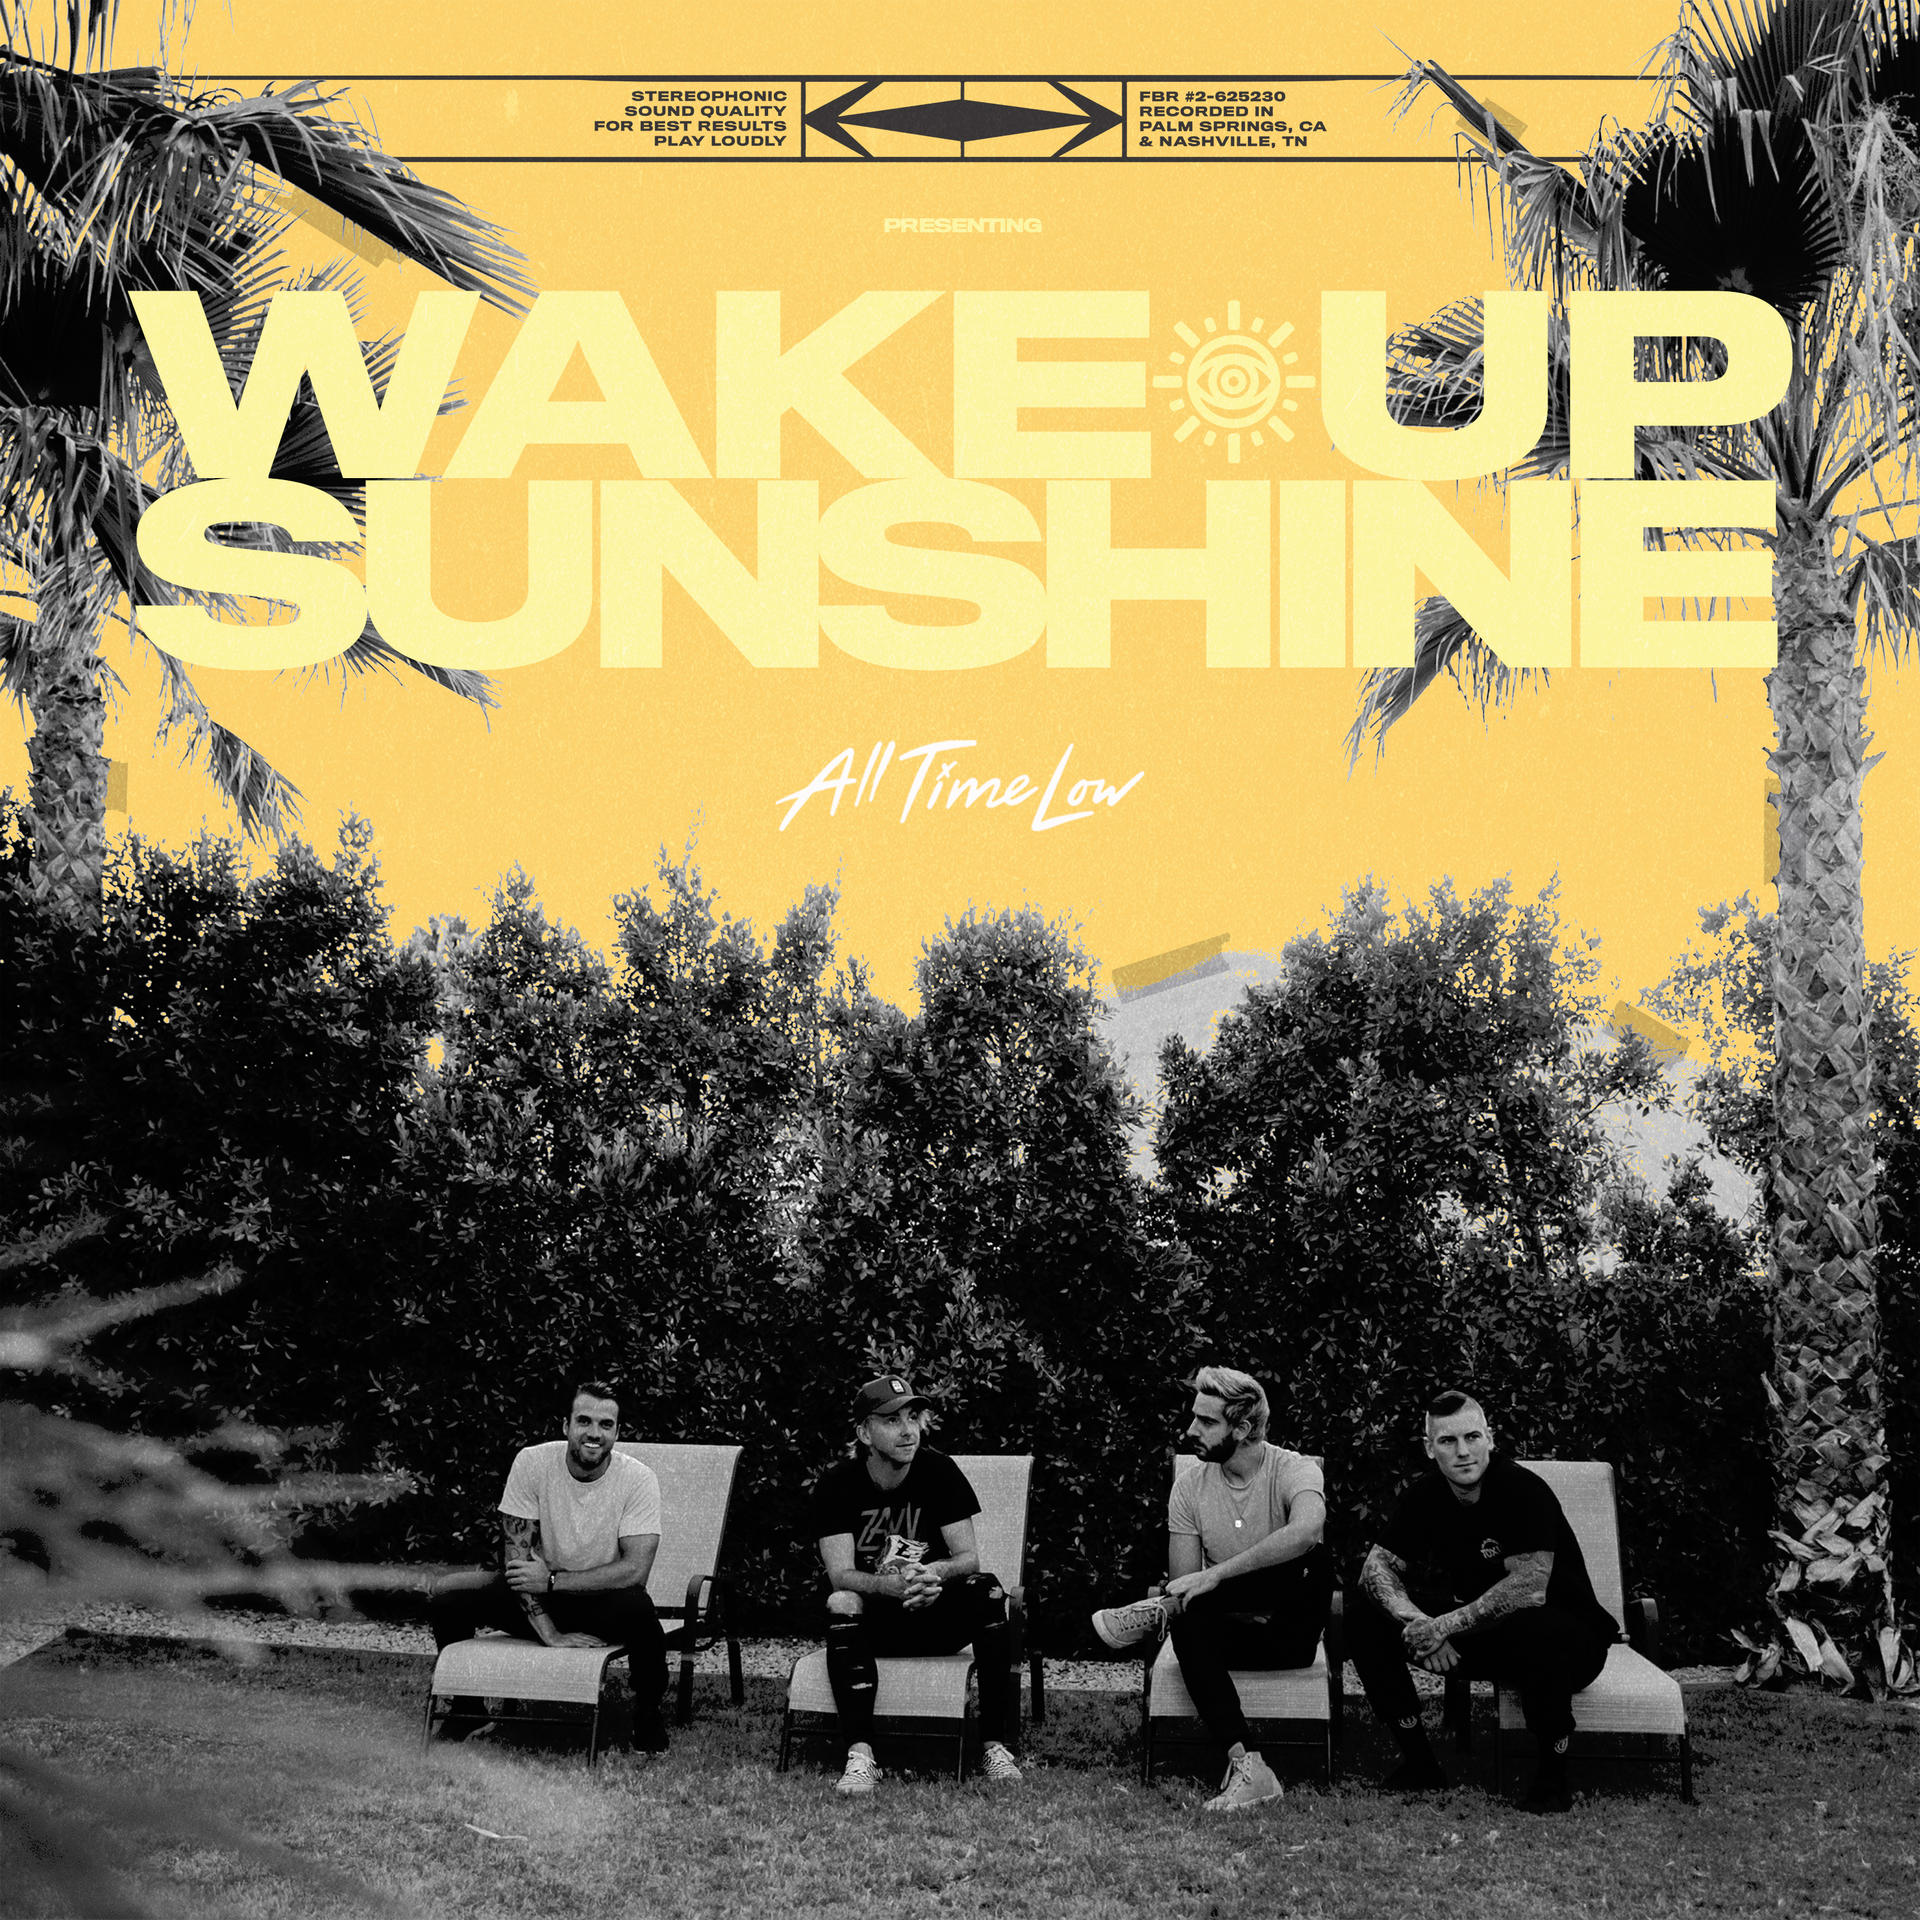 Time - All Up,Sunshine - Low (CD) Wake